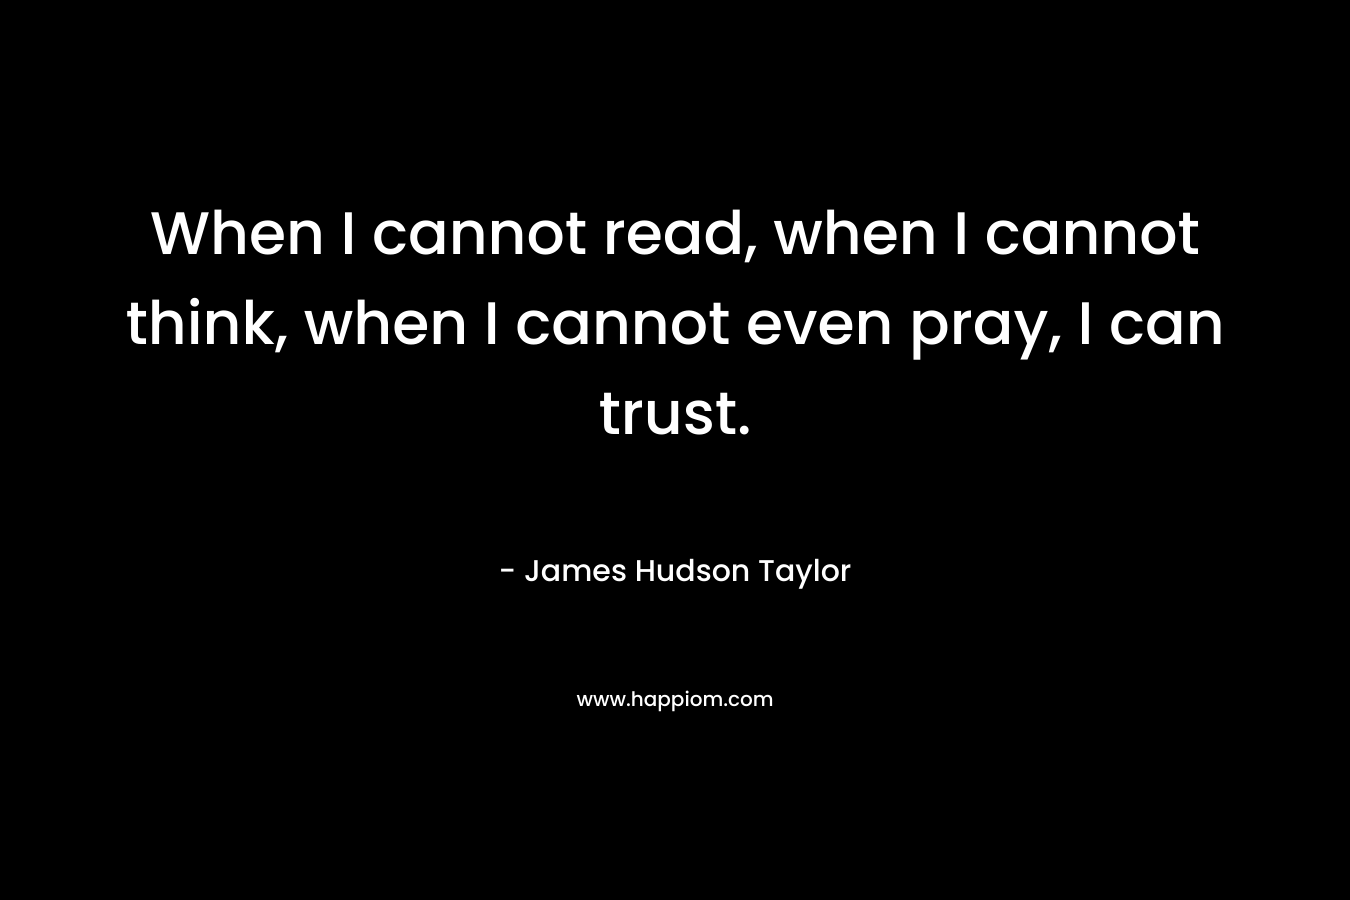 When I cannot read, when I cannot think, when I cannot even pray, I can trust.